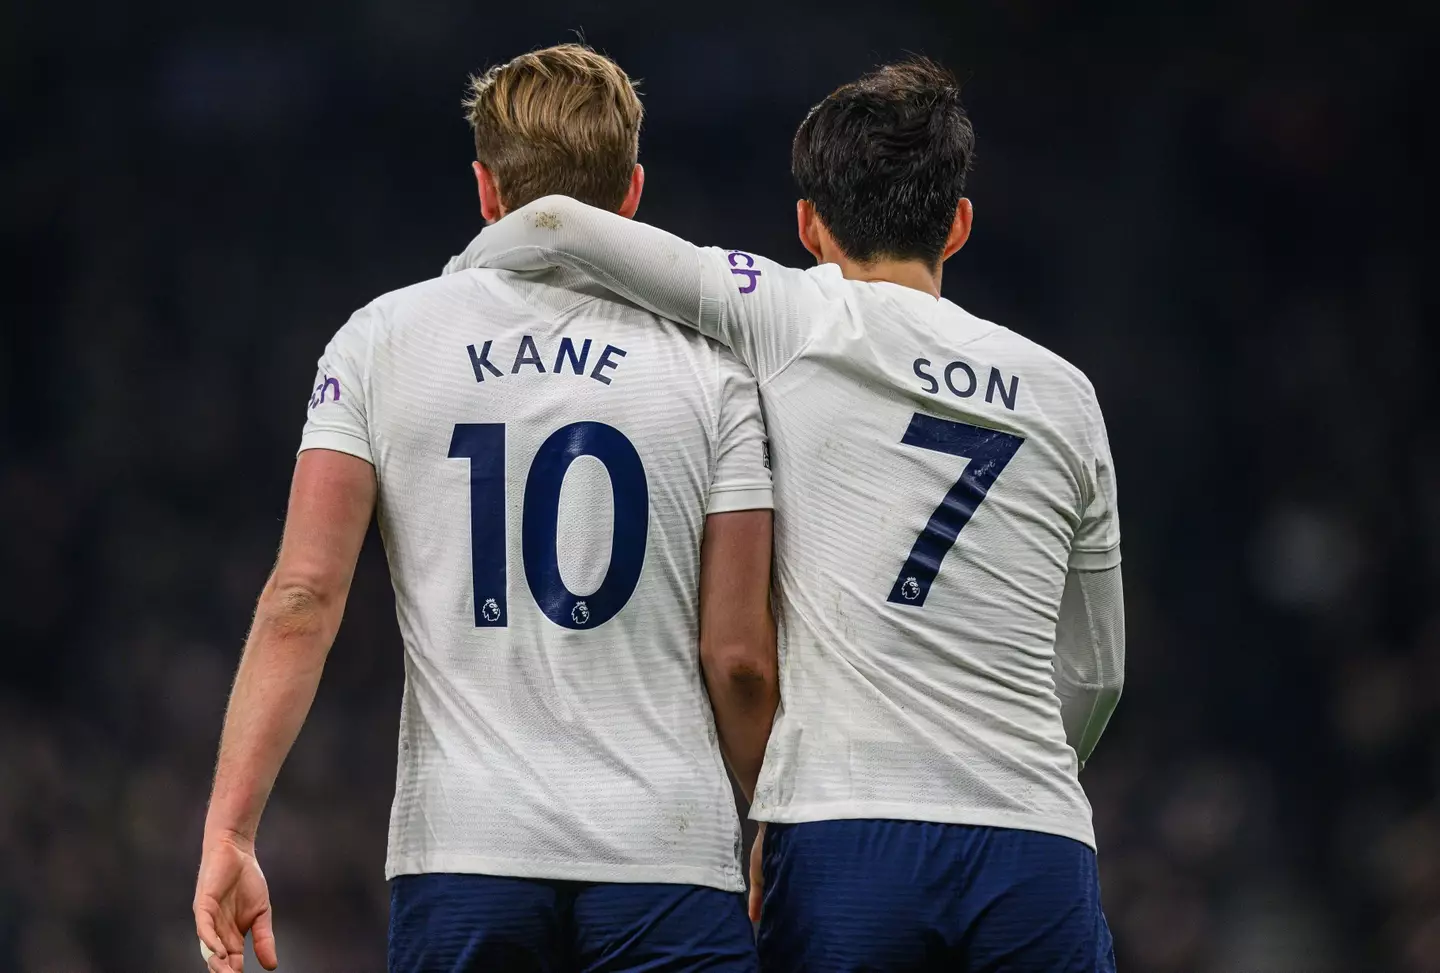 Harry Kane and Son Heung-min are the best partnership in Premier League history and now they've been joined by Dejan Kulusevski. Image: PA Images